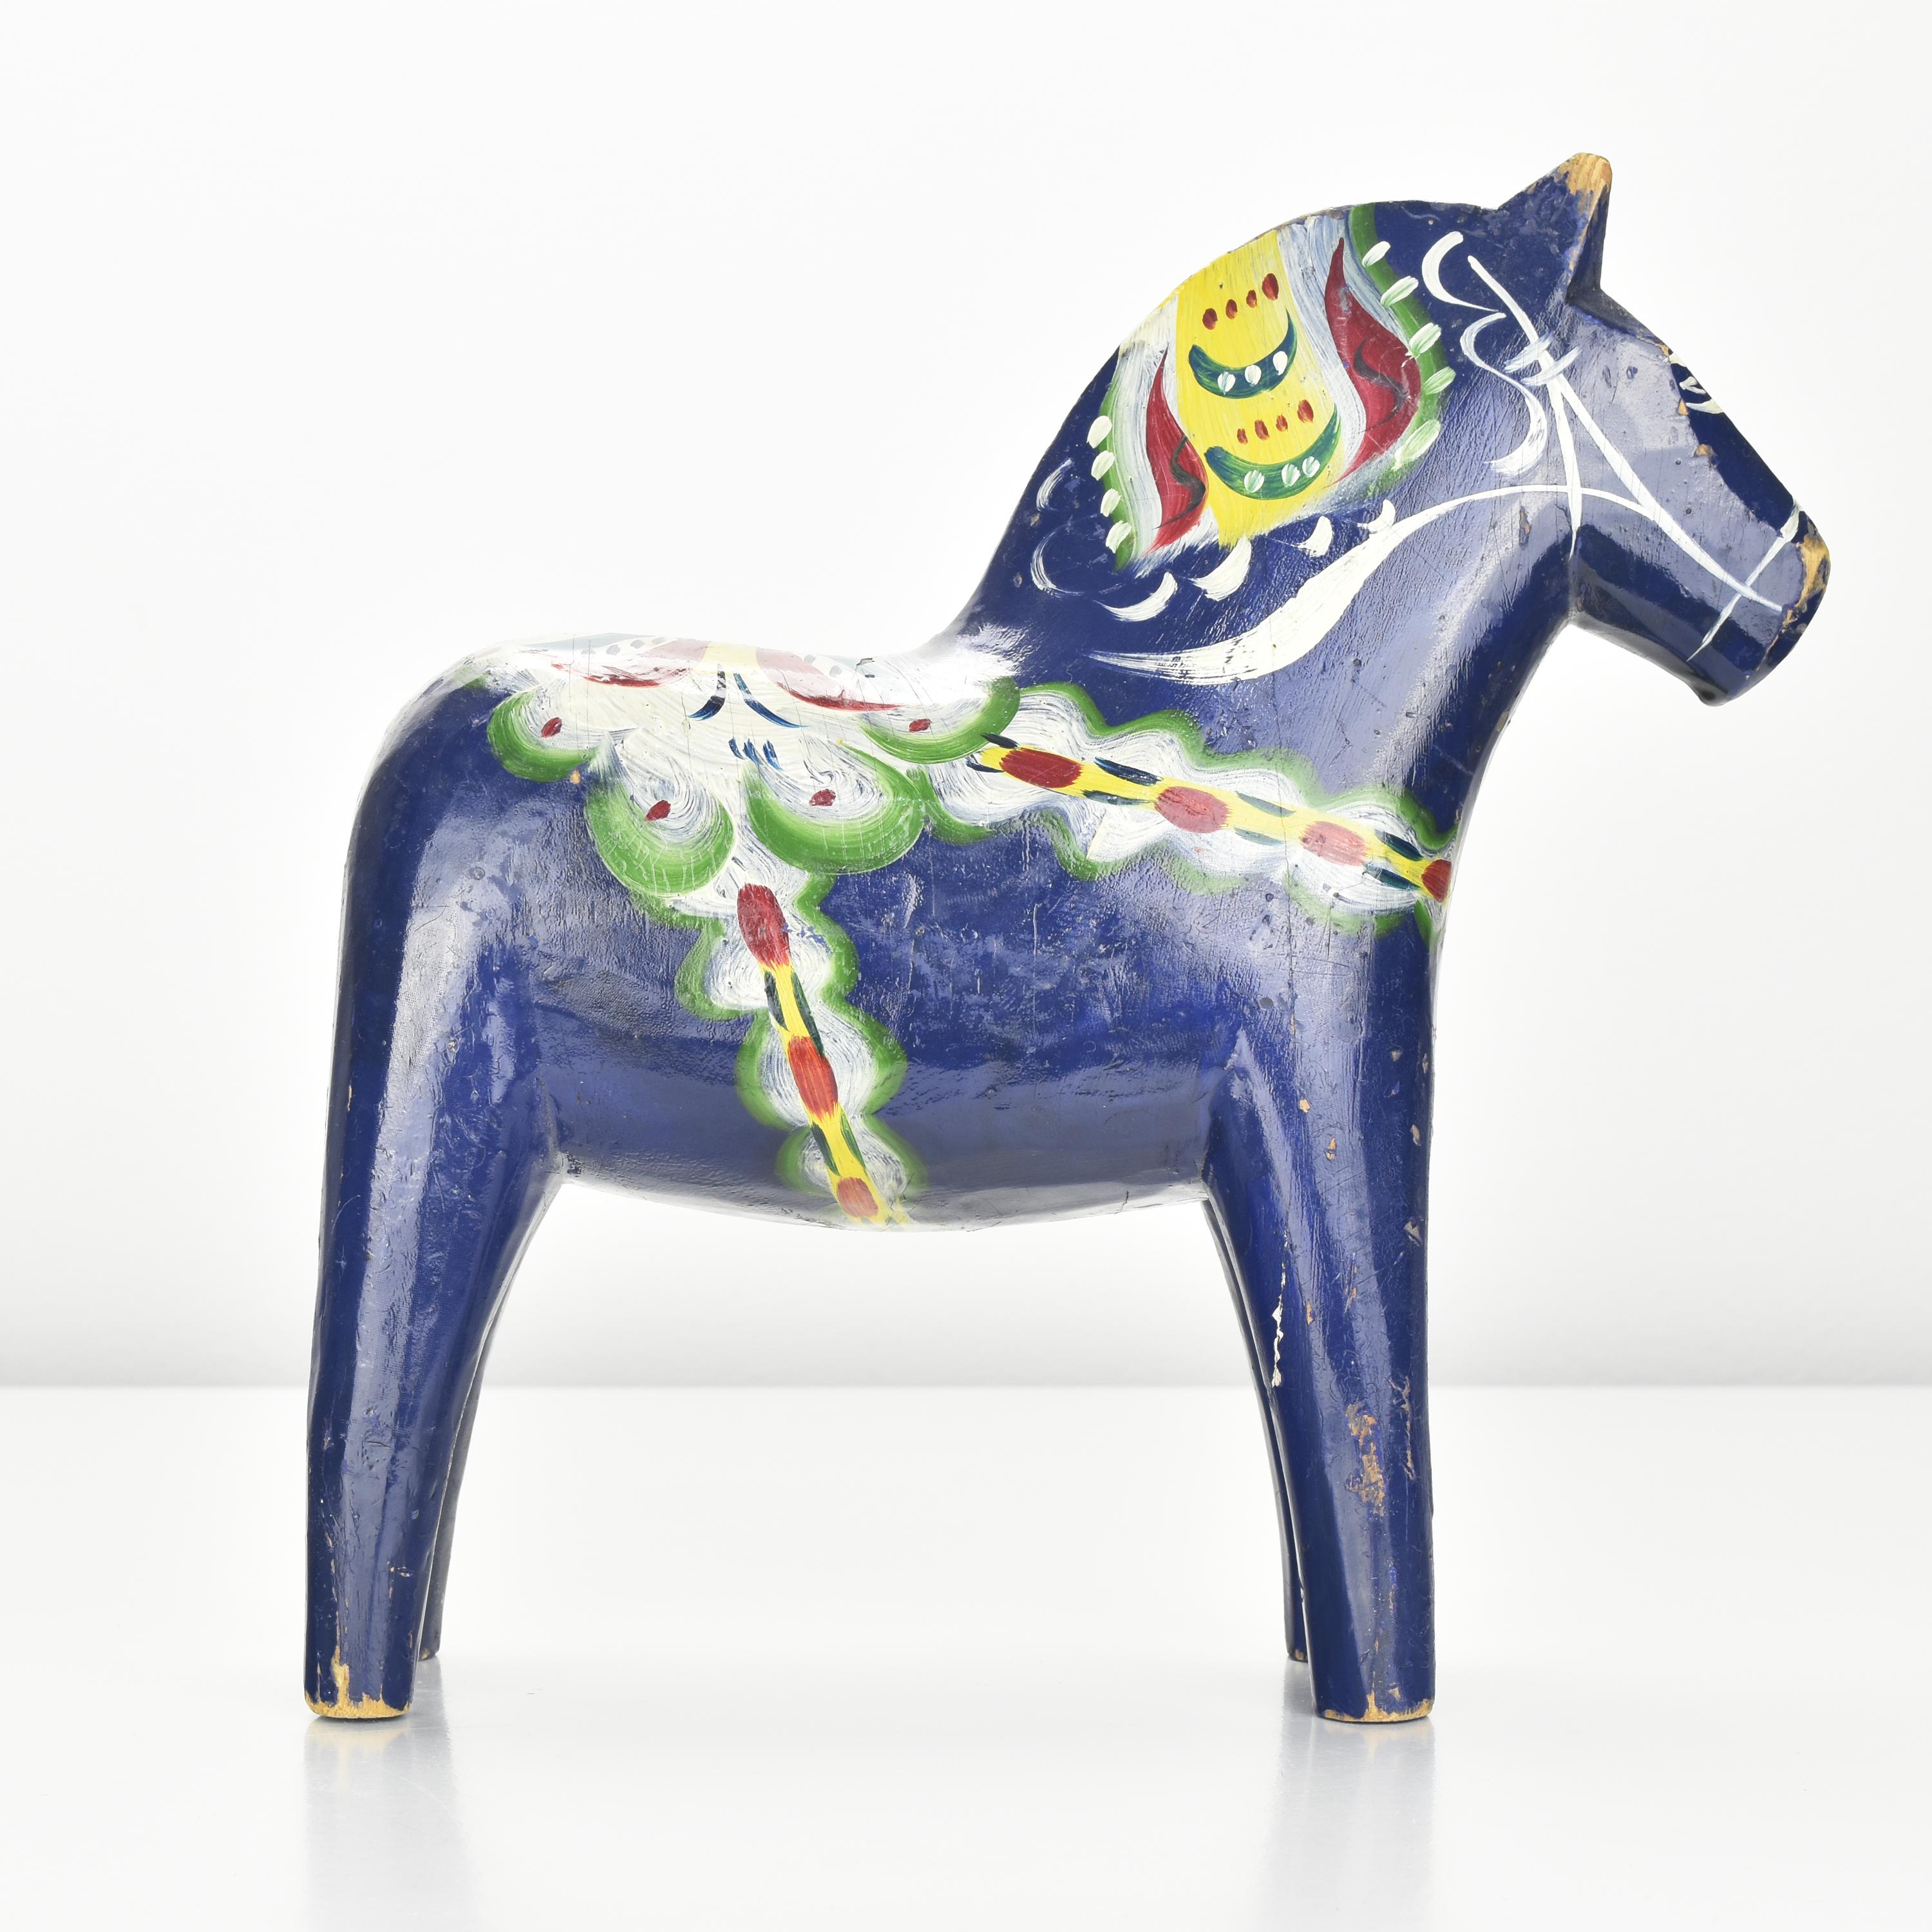 Early 1930s Swedish Dala Horse Figurine by Nils Olsson Carved Painted Wood In Good Condition For Sale In Bad Säckingen, DE